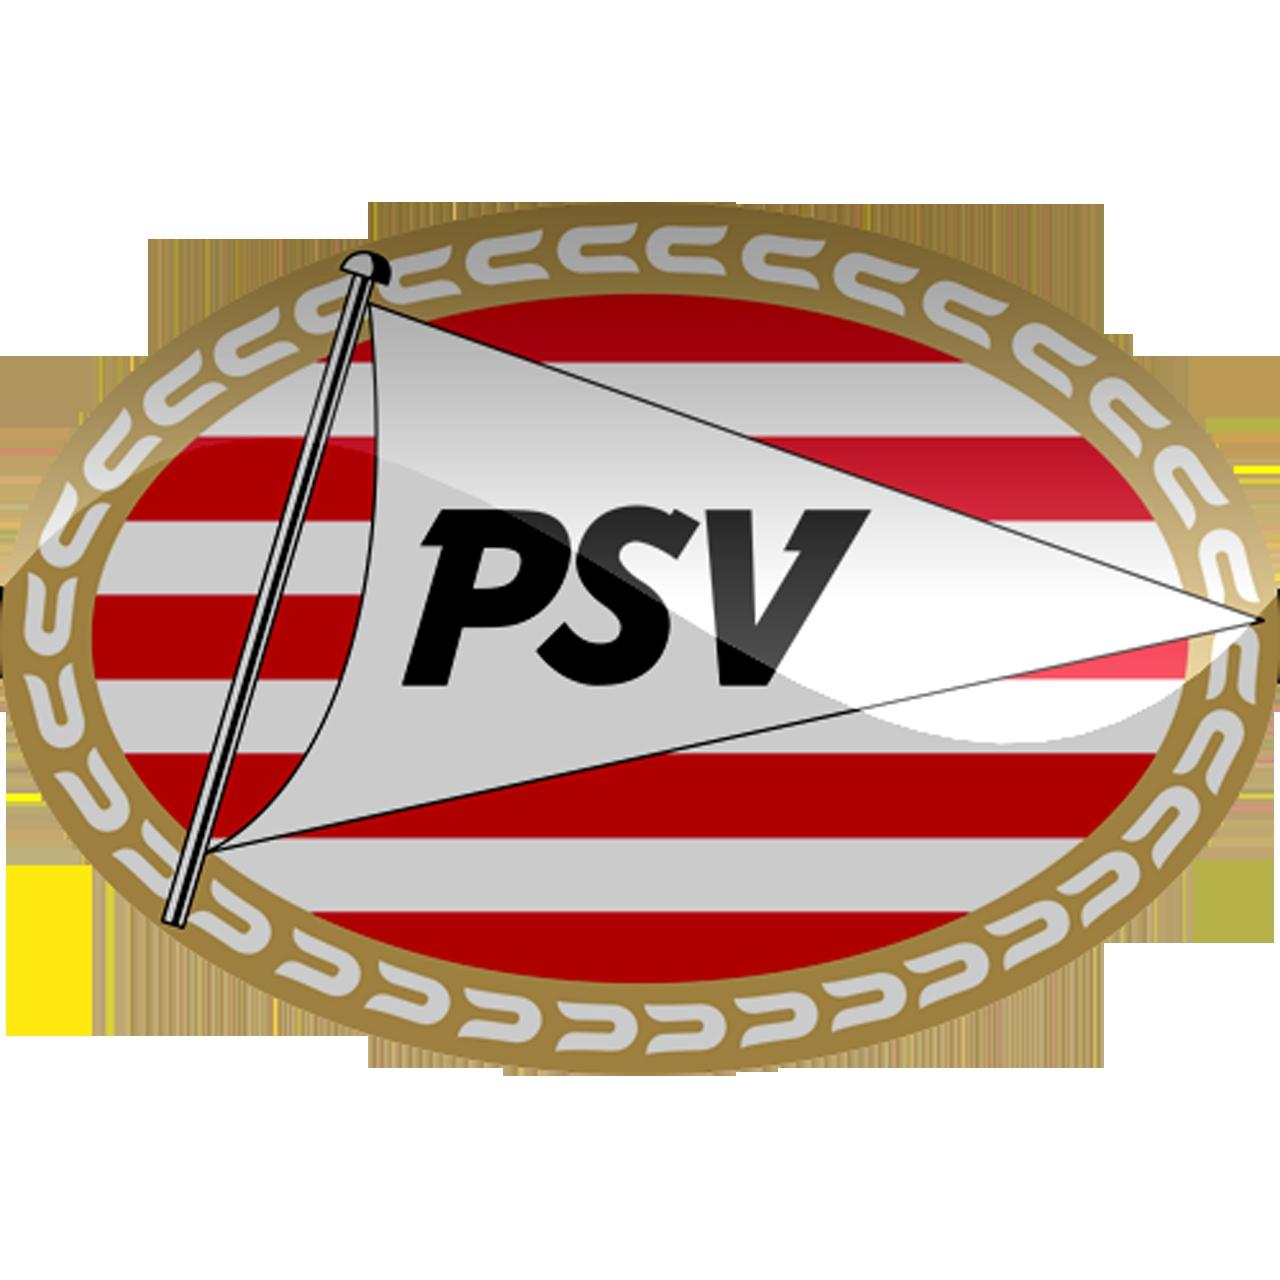 Lovely Psv Eindhoven Badge. Great Foofball Club